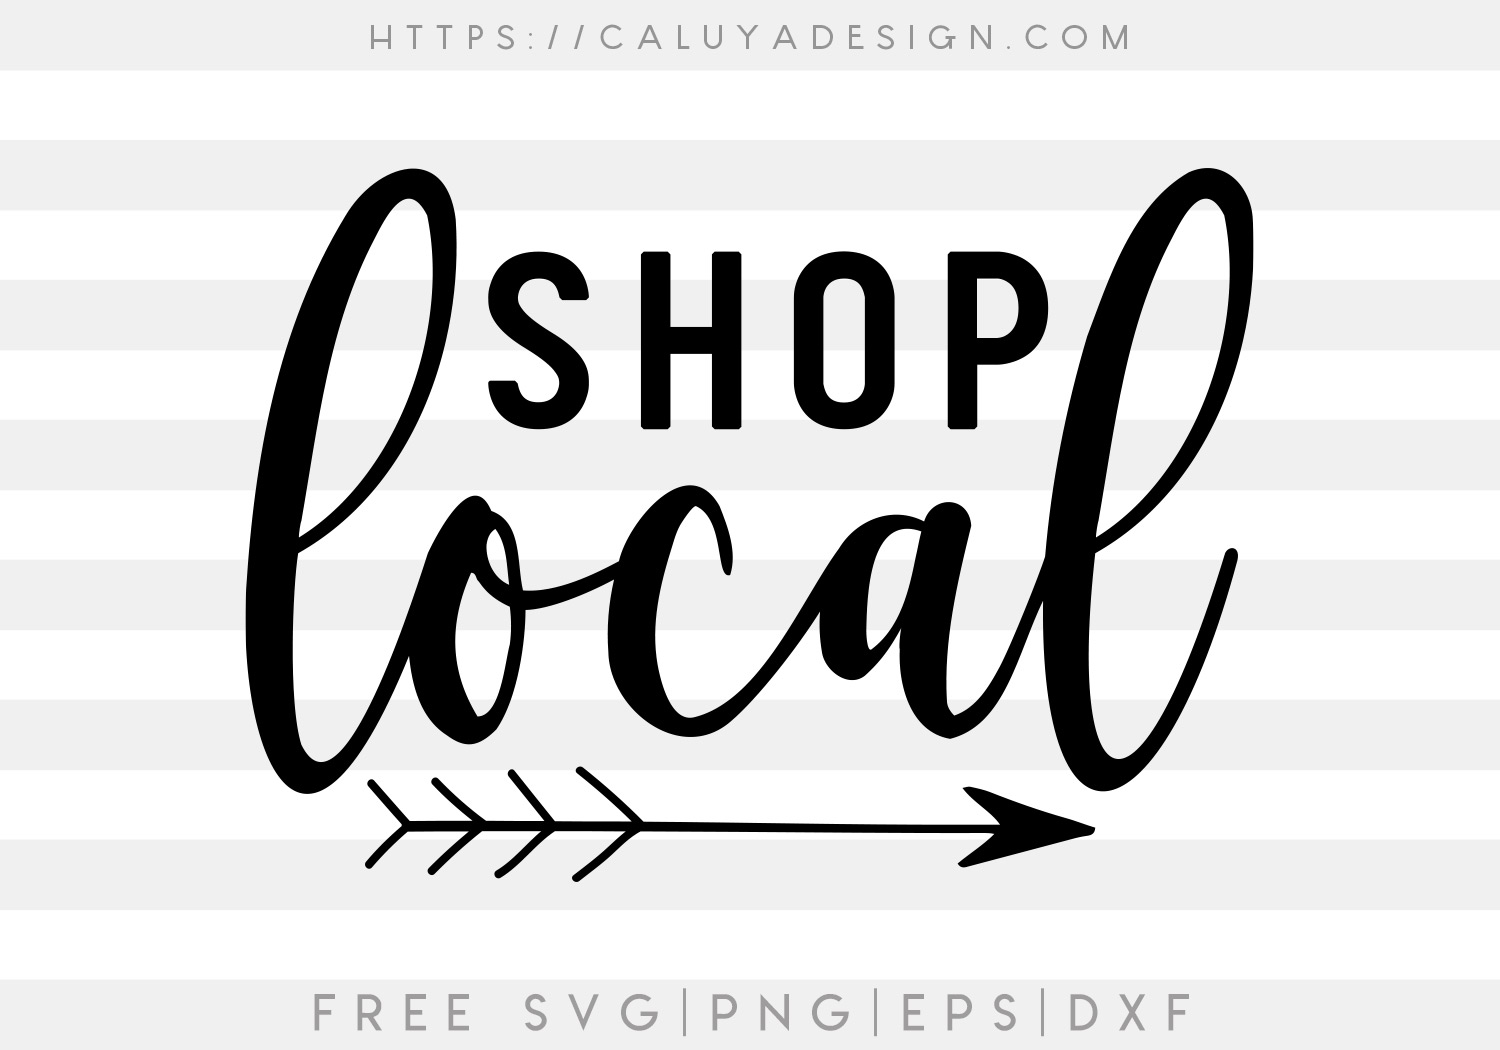 Shop Local SVG, PNG, EPS & DXF